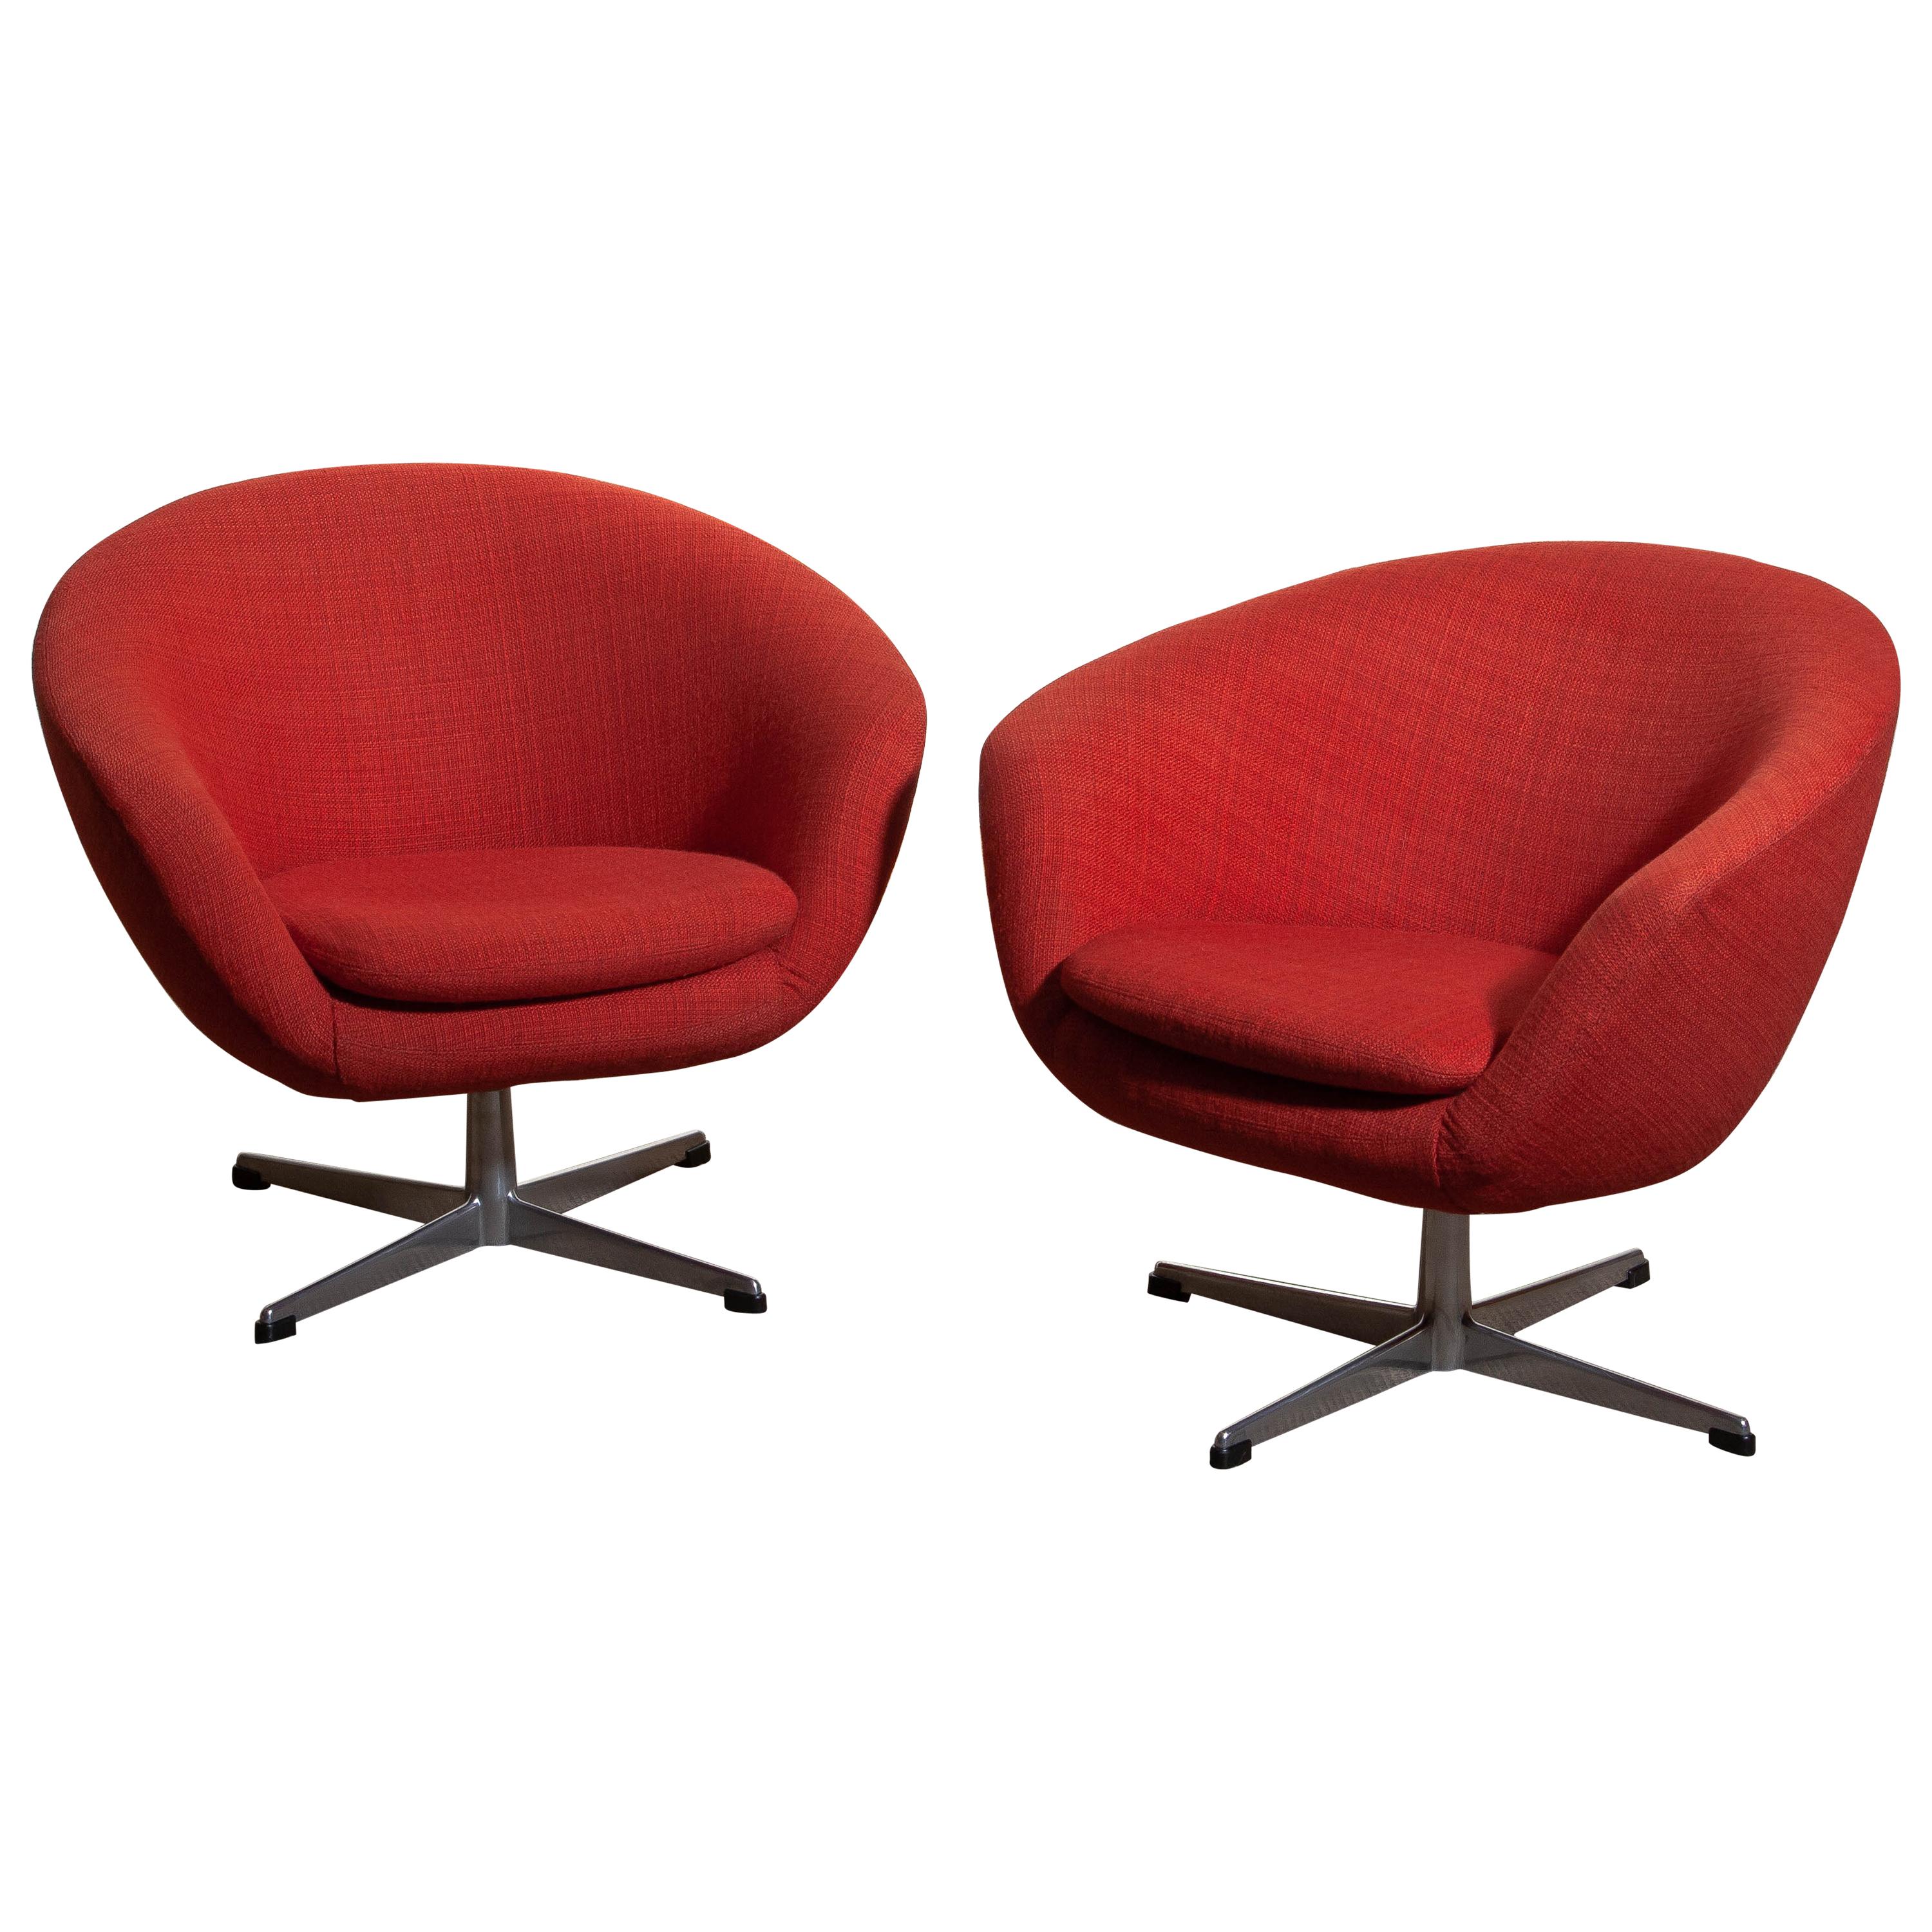 Mid-Century Modern 1960s, Pair of Swivel Lounge Chairs by Carl Eric Klote for Overman, Denmark